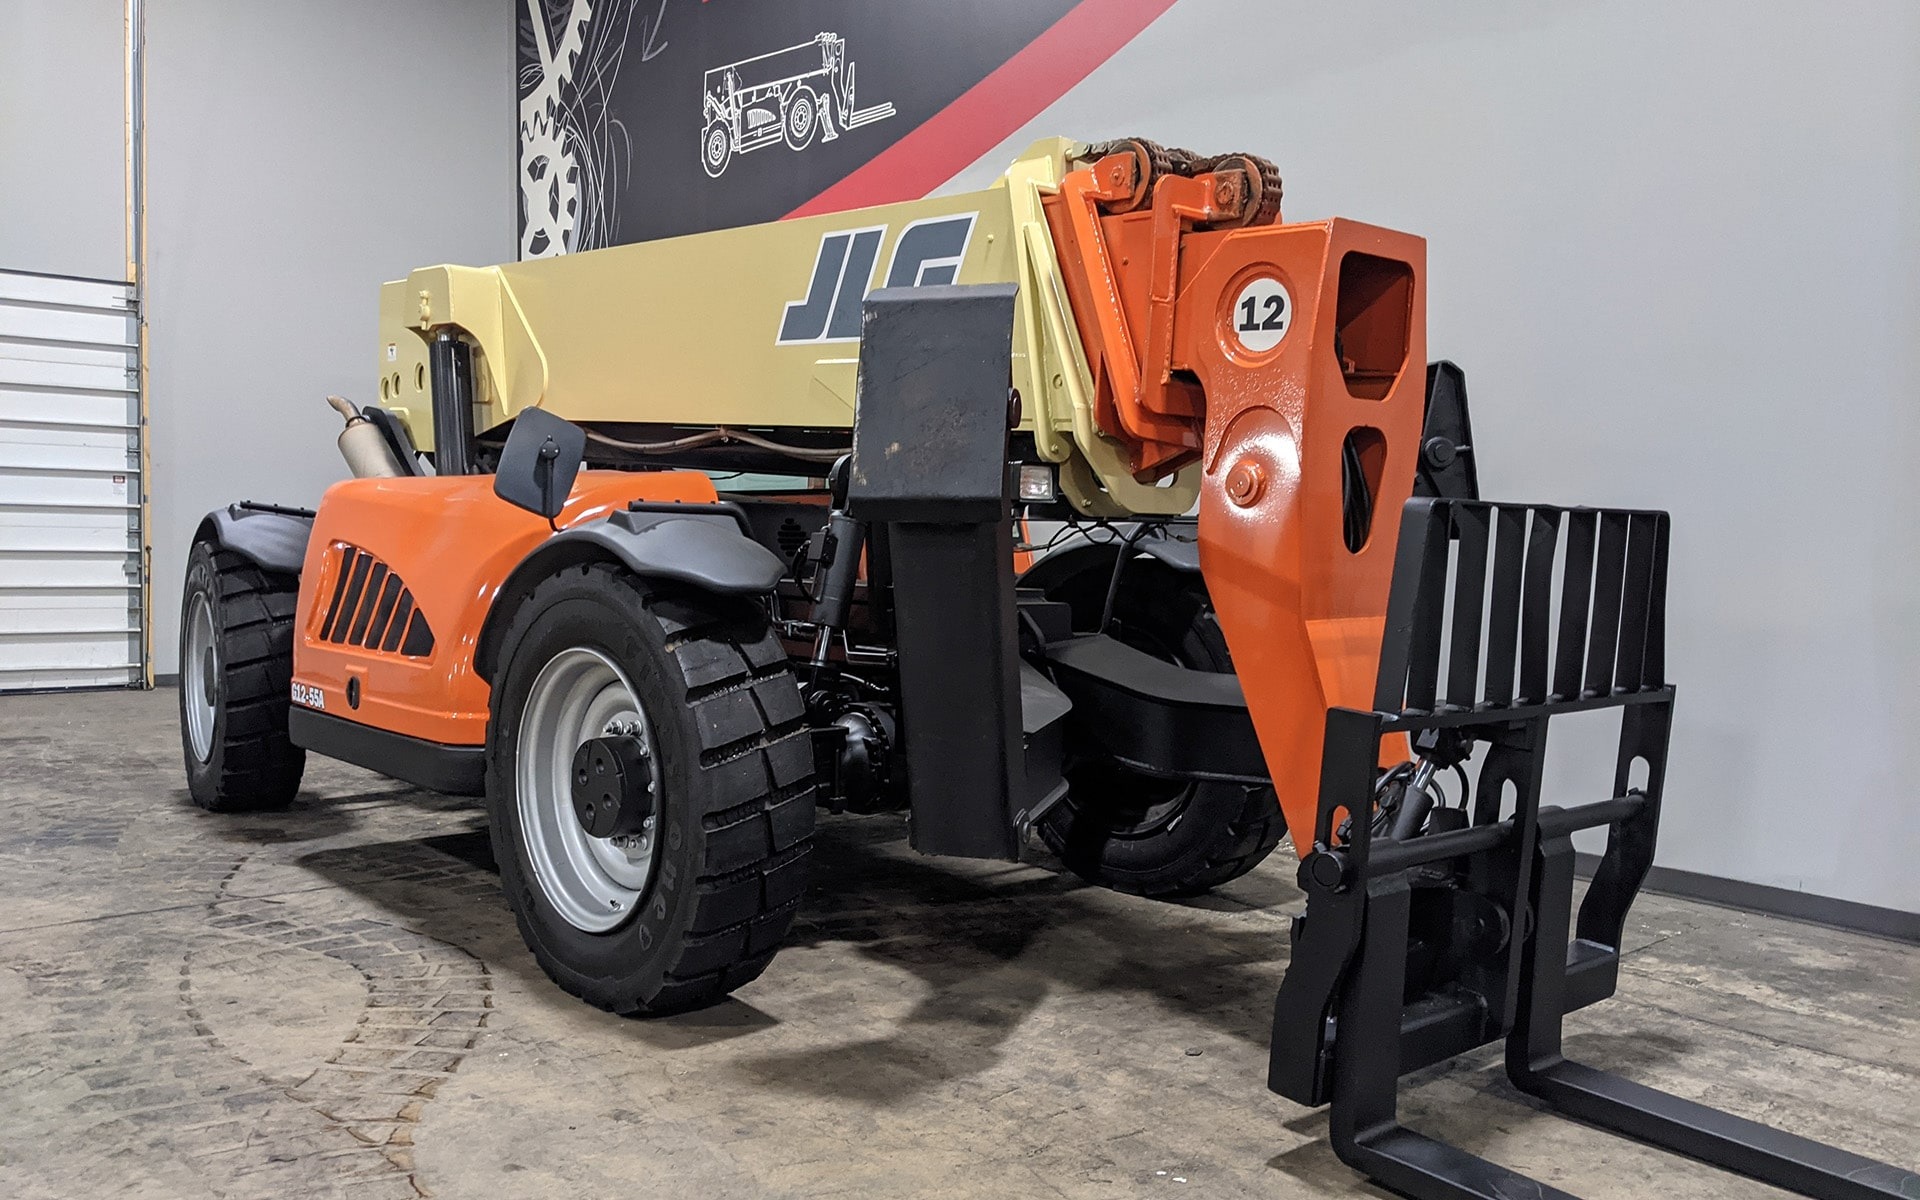 Used 2009 JLG G12-55A  | Cary, IL